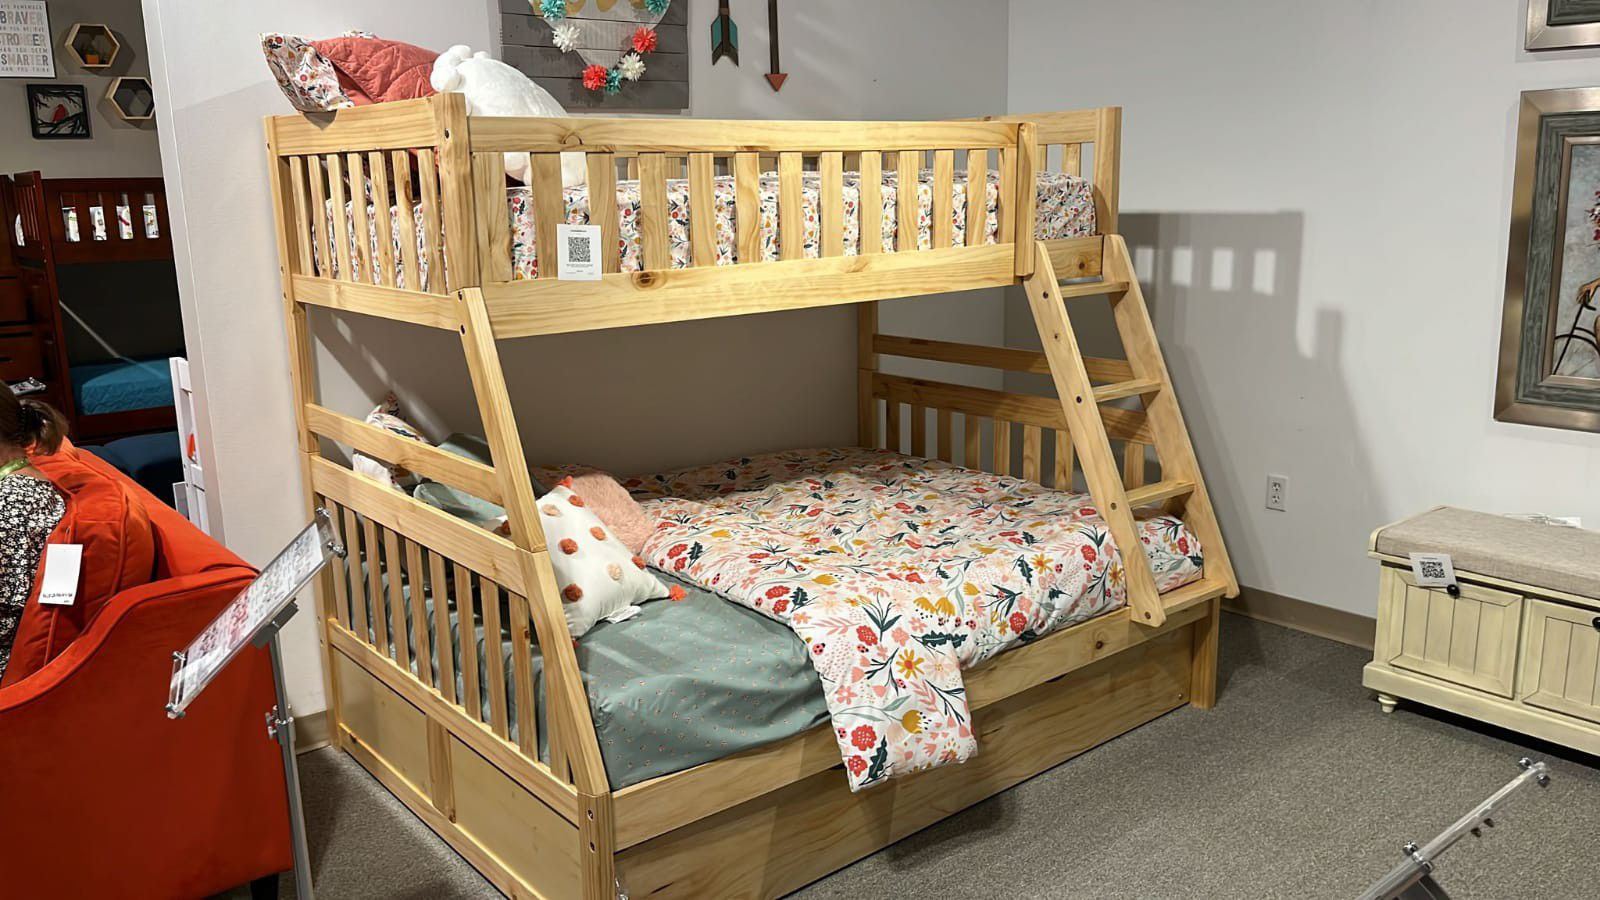 Bartly Twin/Full Bunk Bed With Twin Trundle